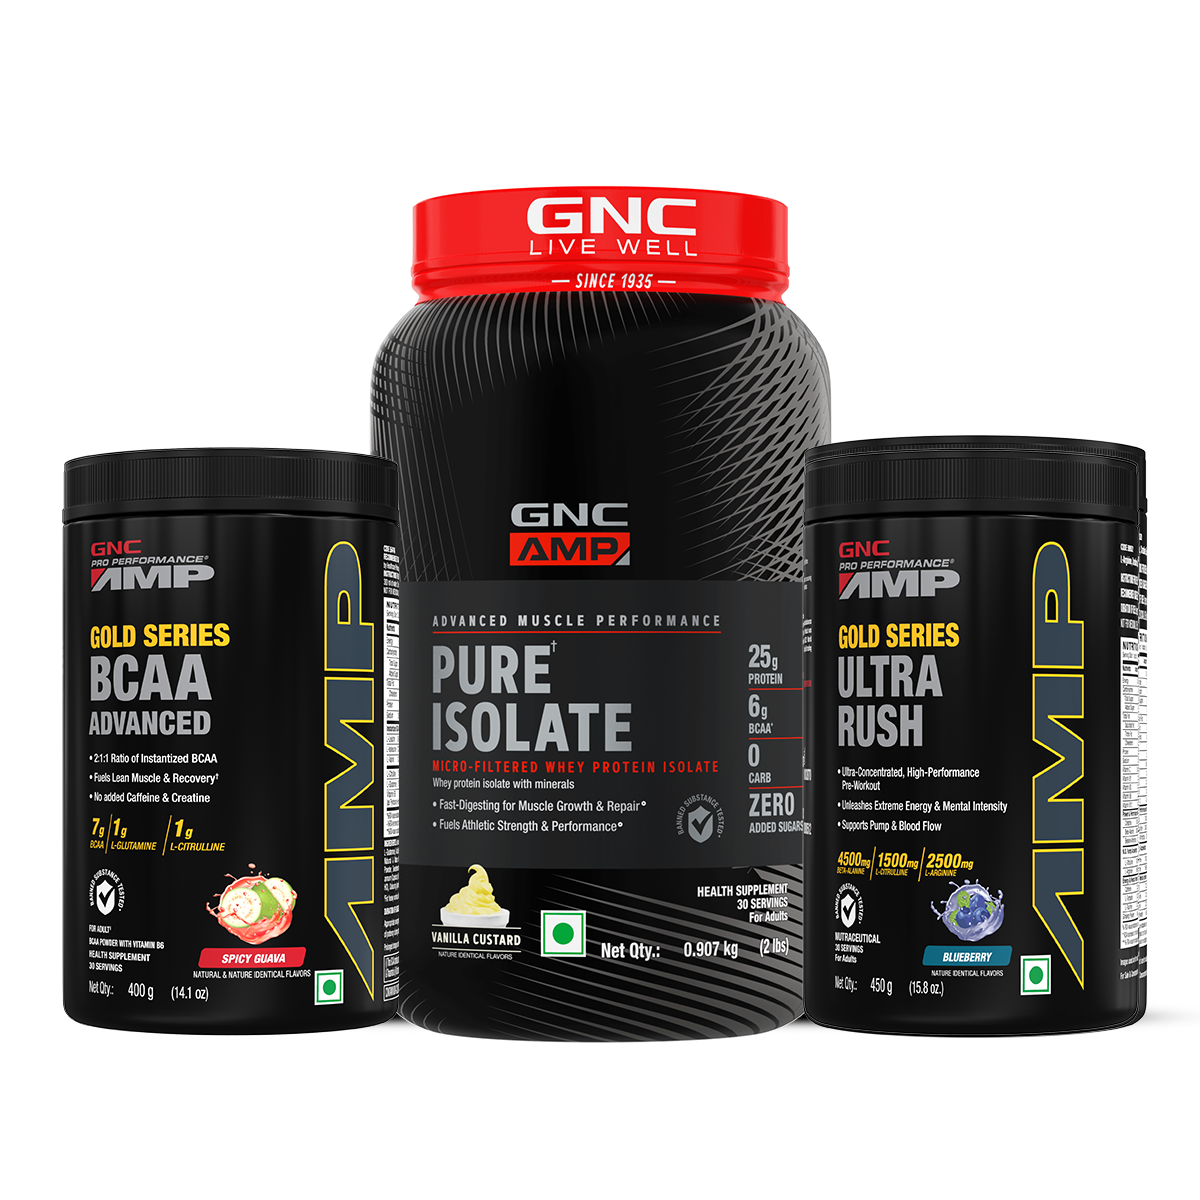 Complete Workout Stack For Advanced - Maximizes Lean Muscle Gains | Promotes Muscle Building  | Improves Mental Focus & Energy